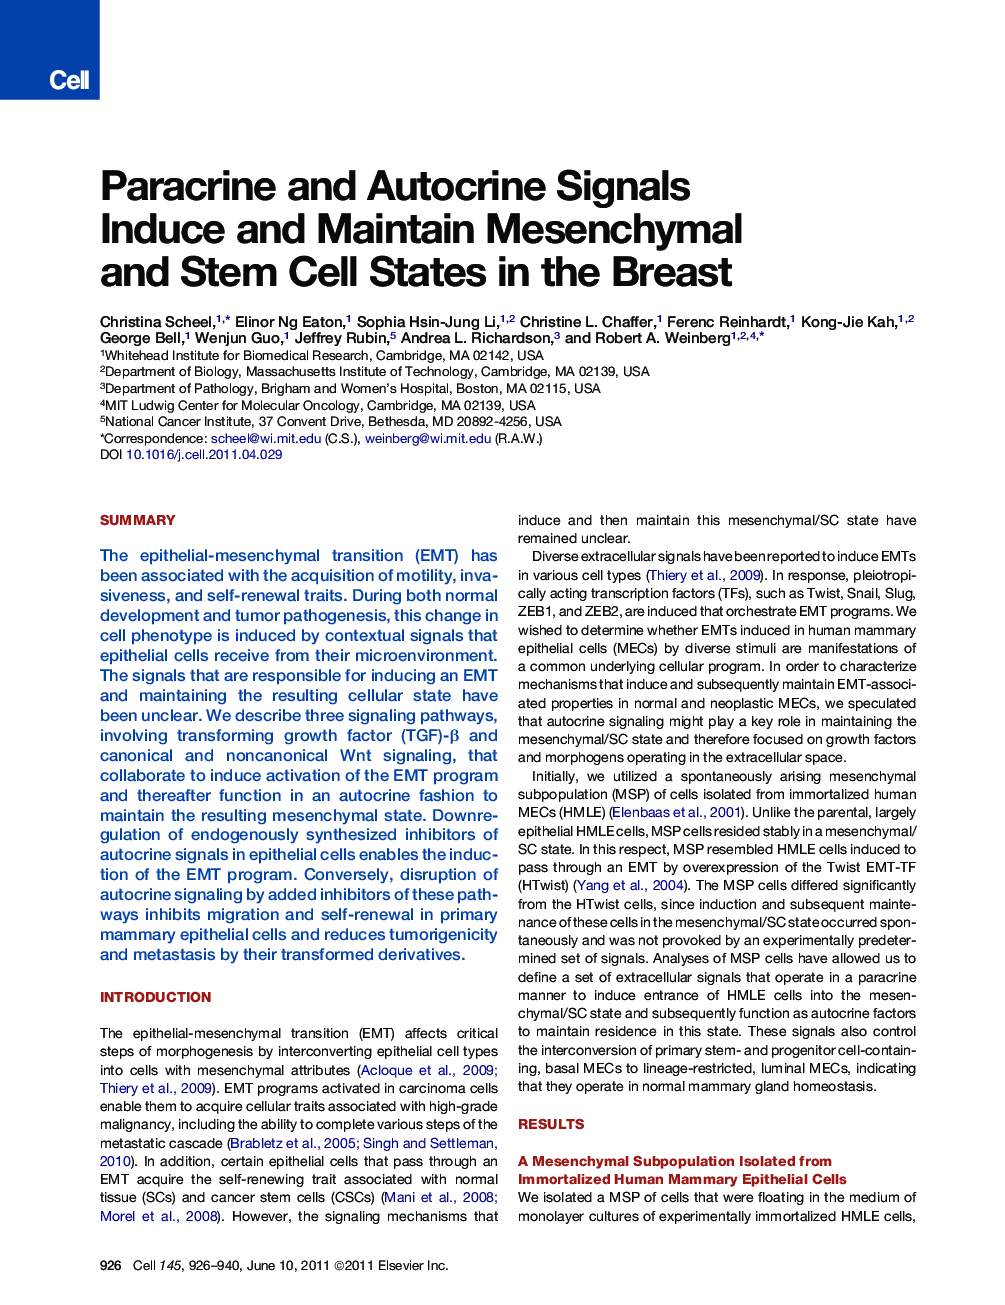 Paracrine and Autocrine Signals Induce and Maintain Mesenchymal and Stem Cell States in the Breast